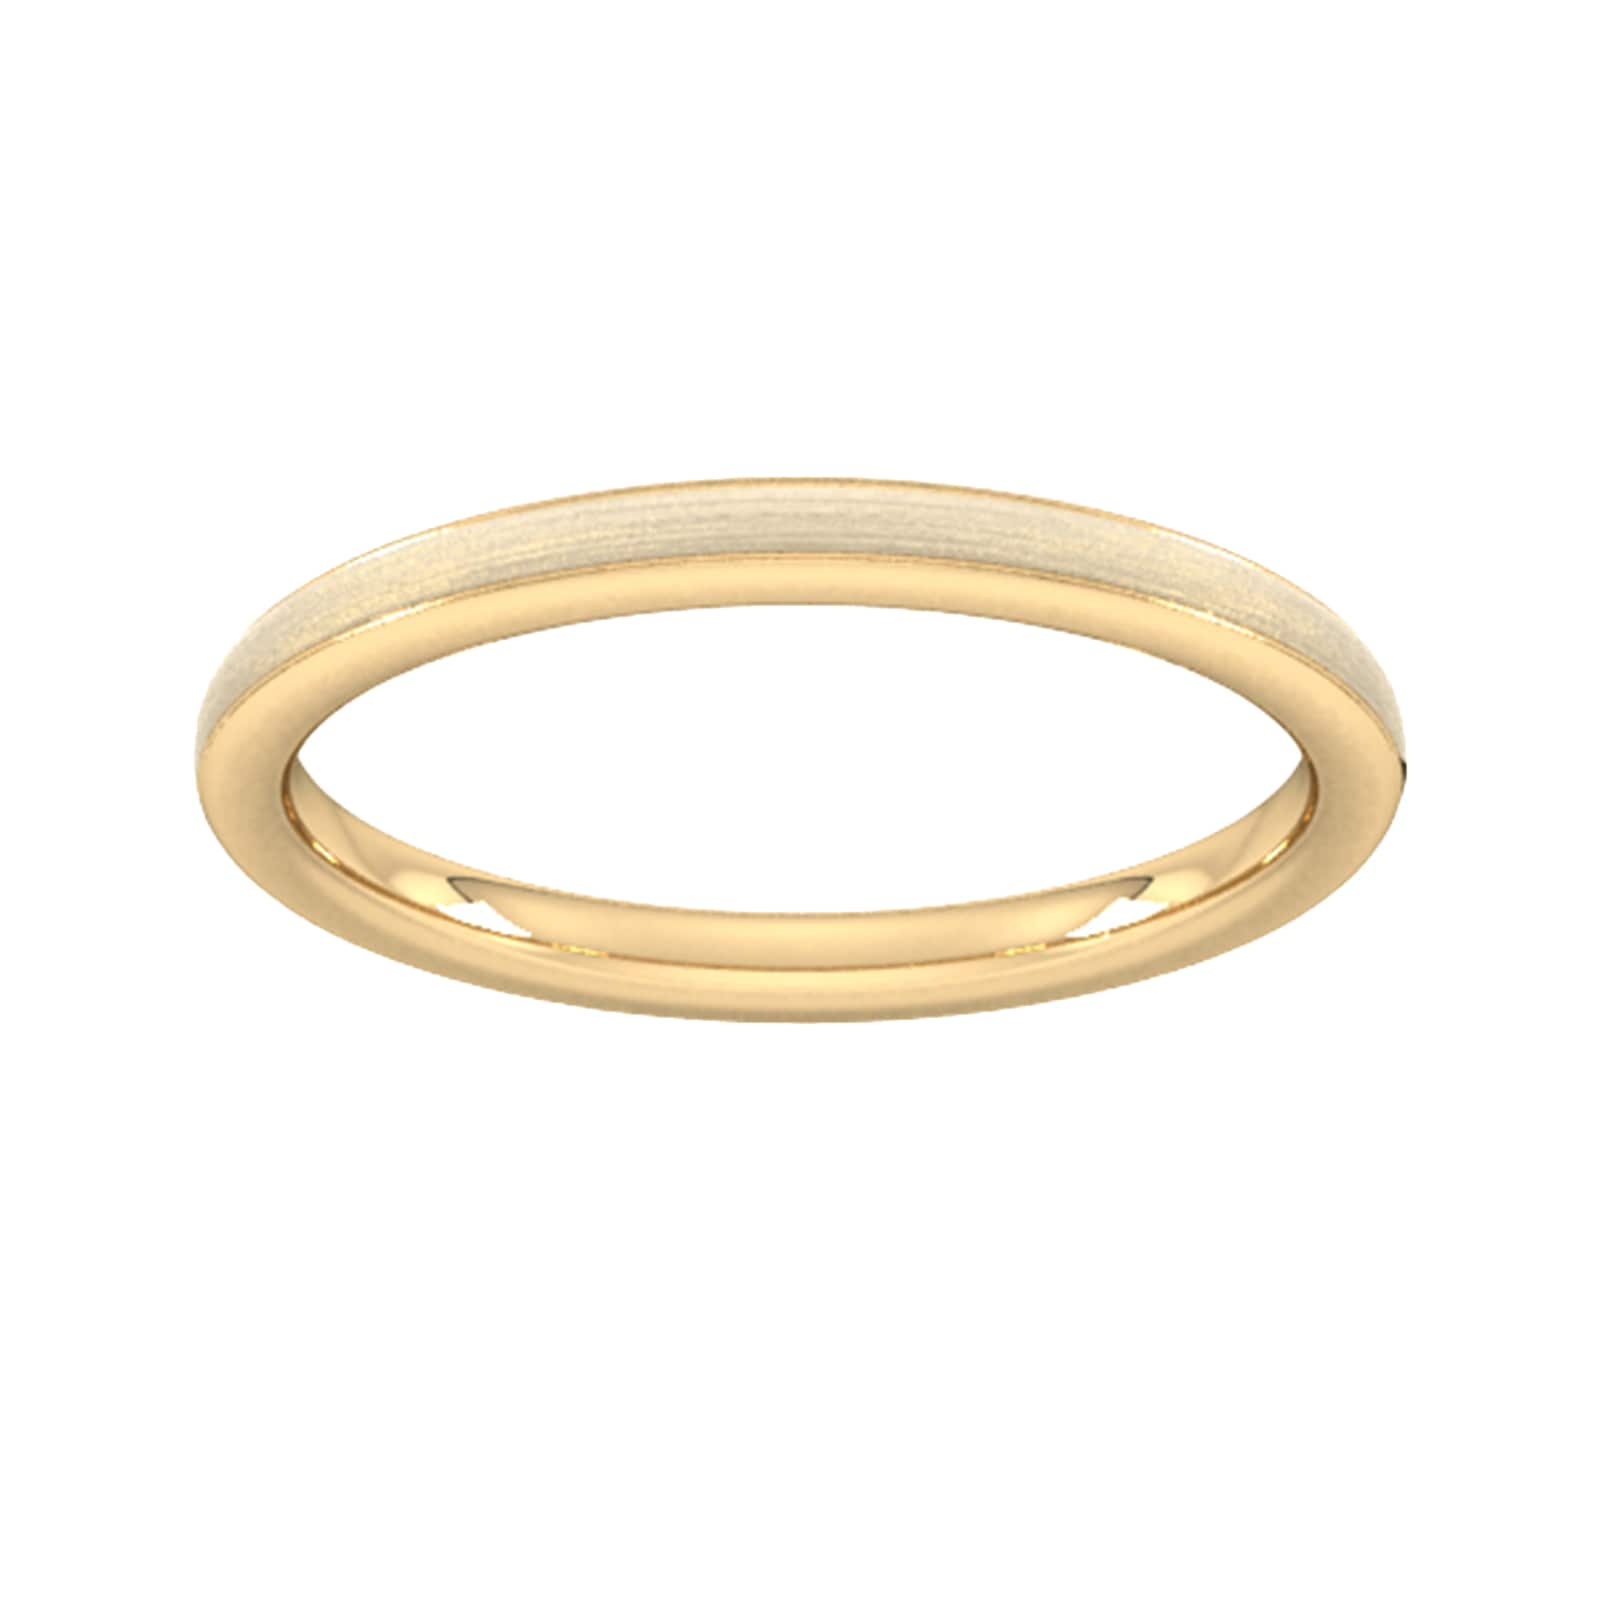 2mm Slight Court Standard Matt Centre With Grooves Wedding Ring In 9 Carat Yellow Gold - Ring Size J